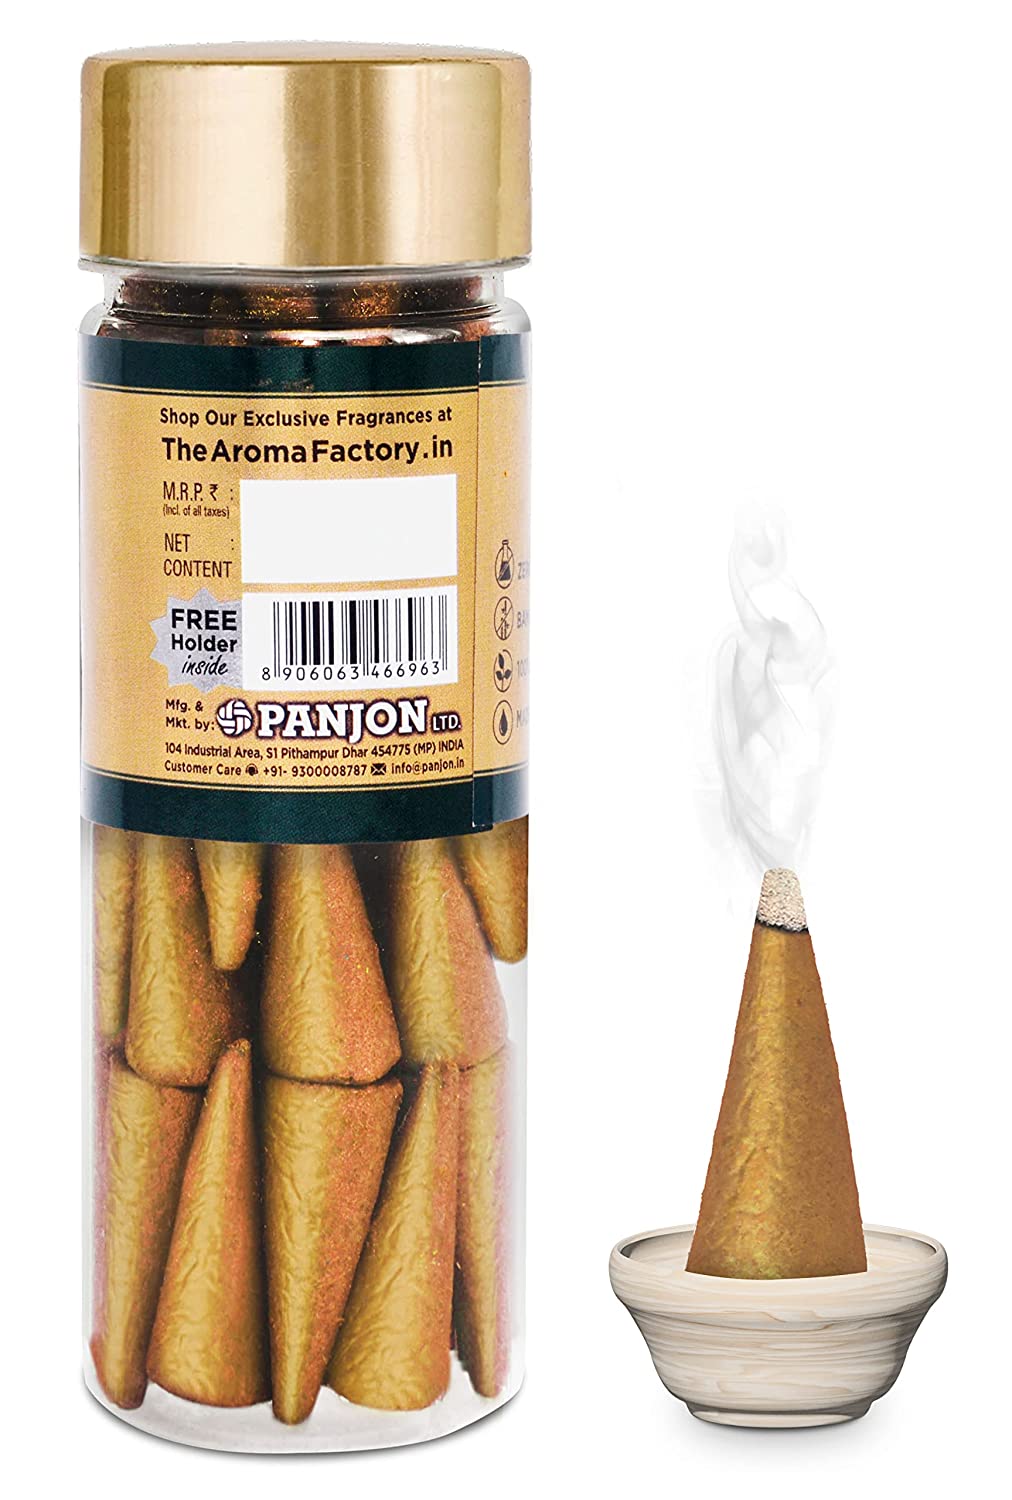 The Aroma Factory Incense Dhoop Cone for Pooja, Oudh (100% Herbal & 0% Charcoal) 1 Bottle x 30 Cones